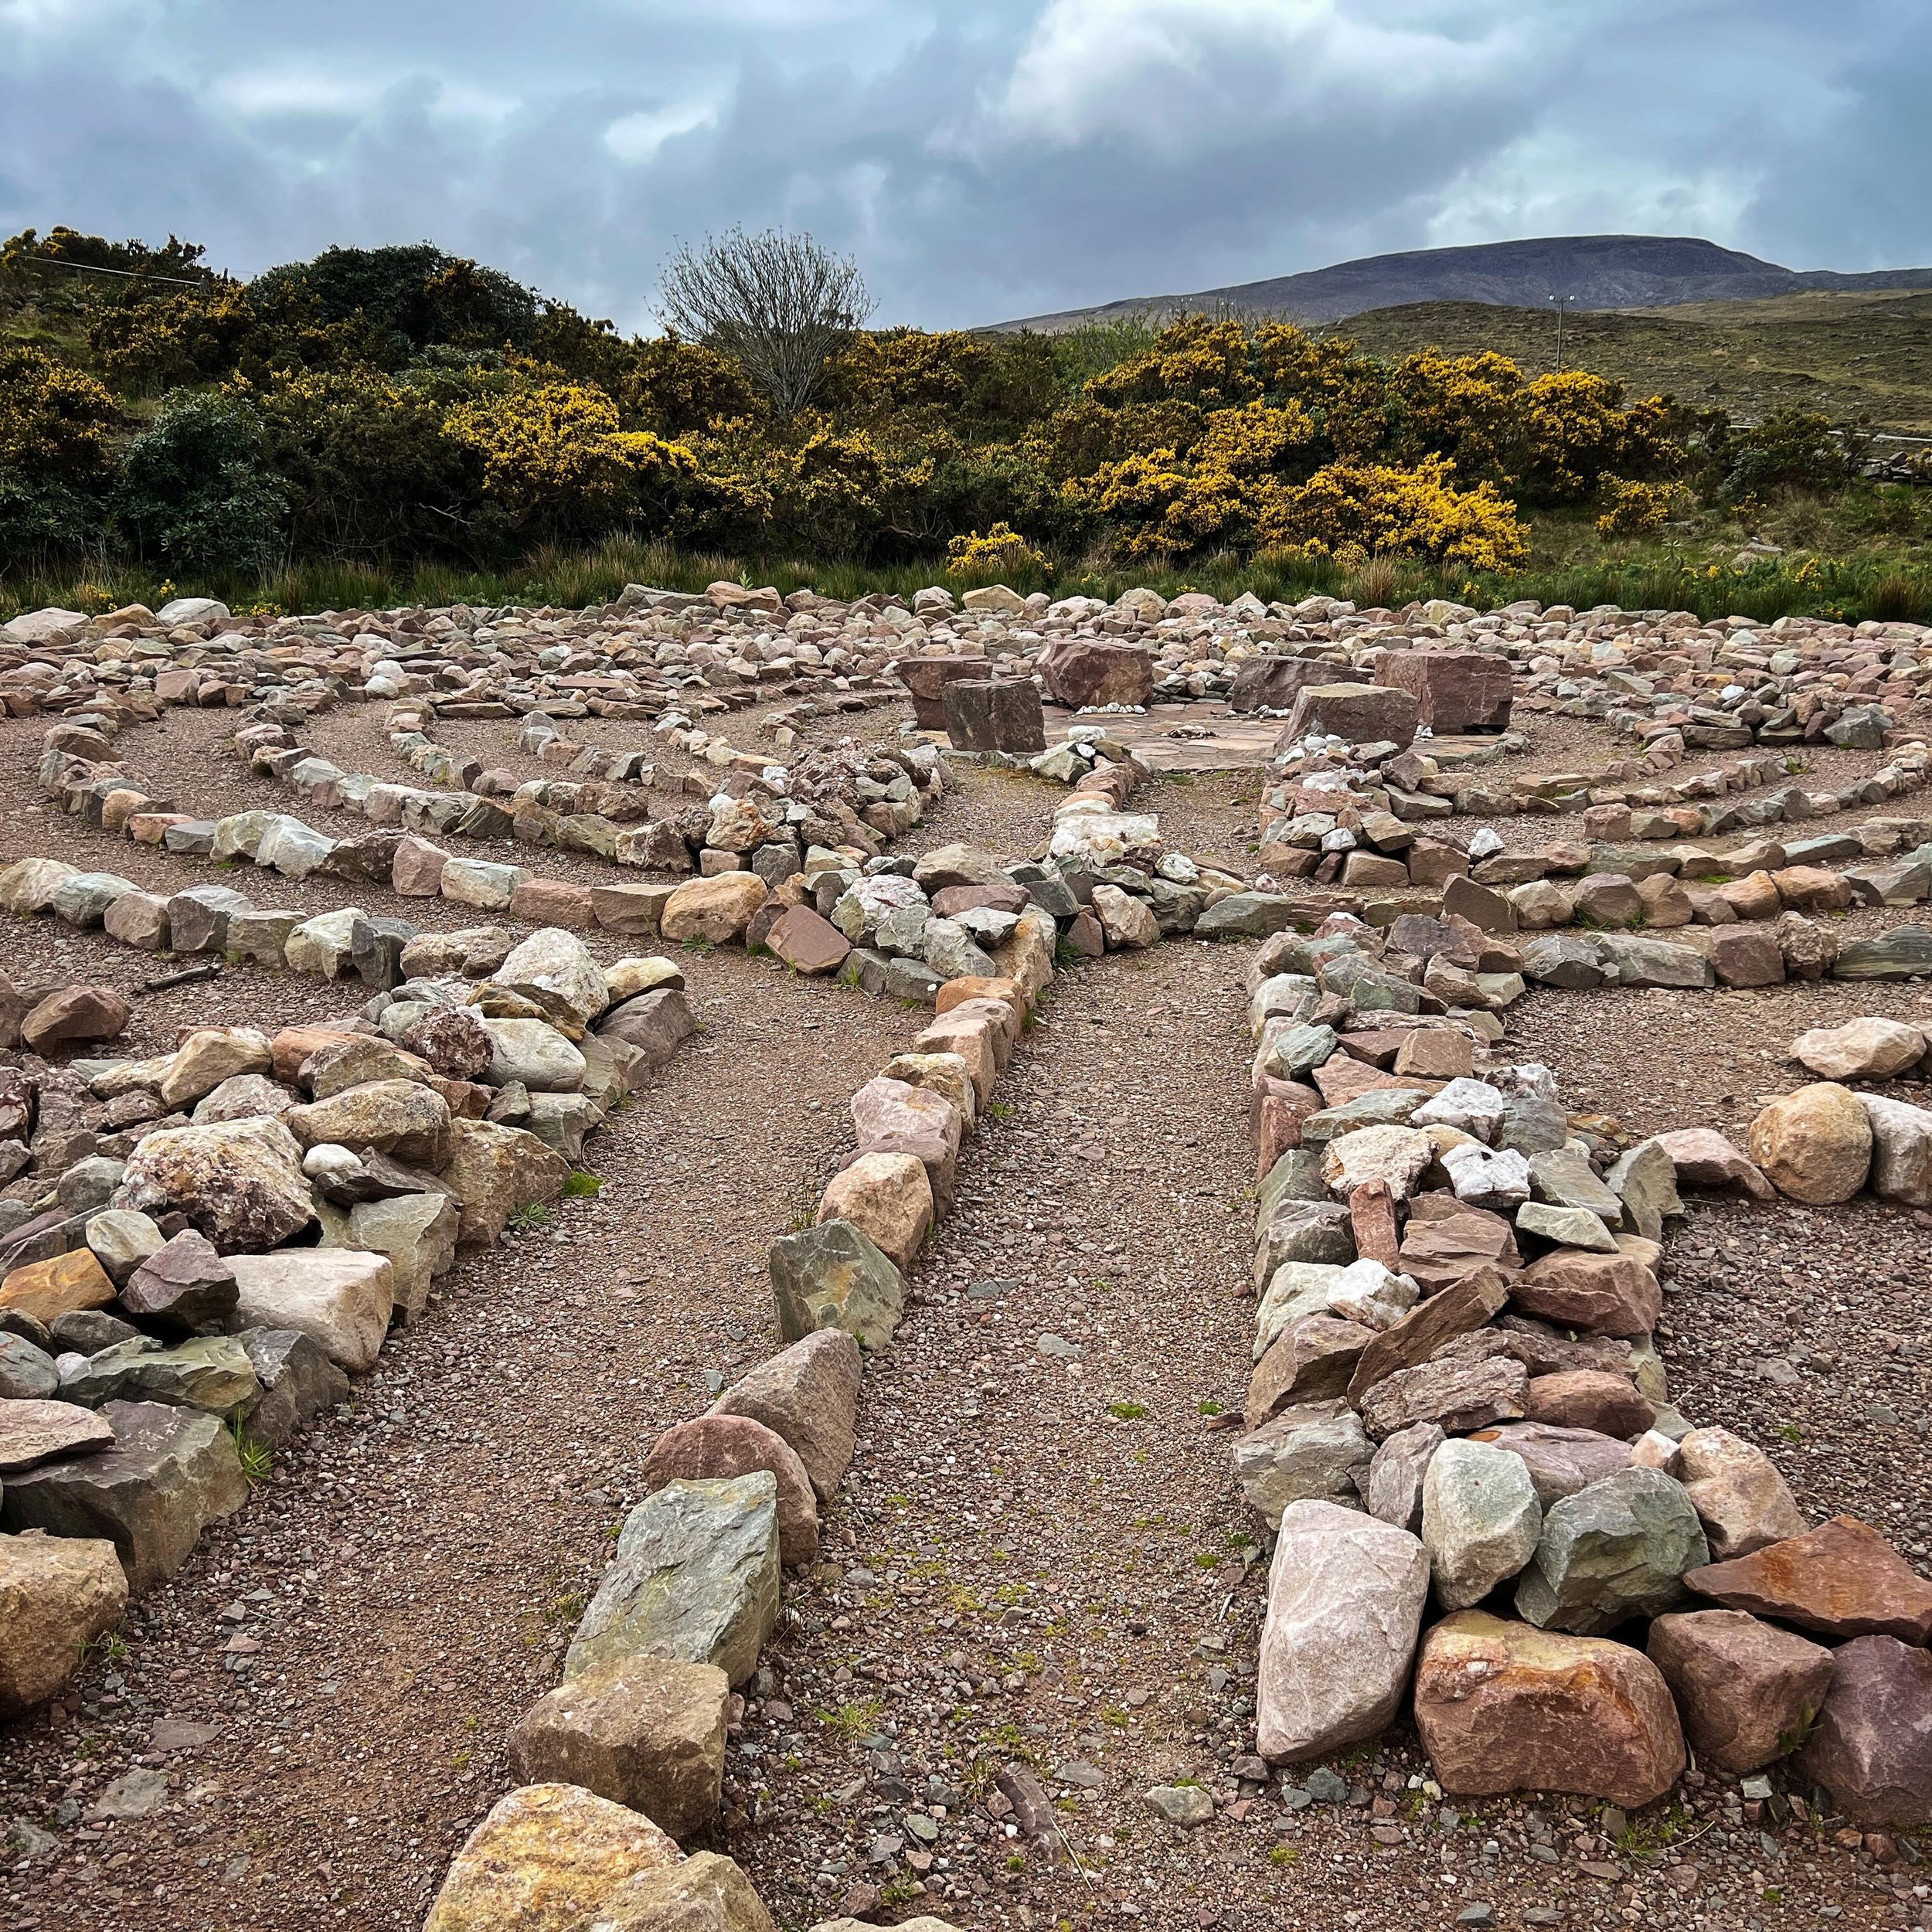 This is the labyrinth I was fortunate enough to walk today, World Labyrinth Day. It is in the town of Mulranny, Ireland and the stones from the surrounding land make it feel full of energy, as does the natural stream running right beside it. Grateful